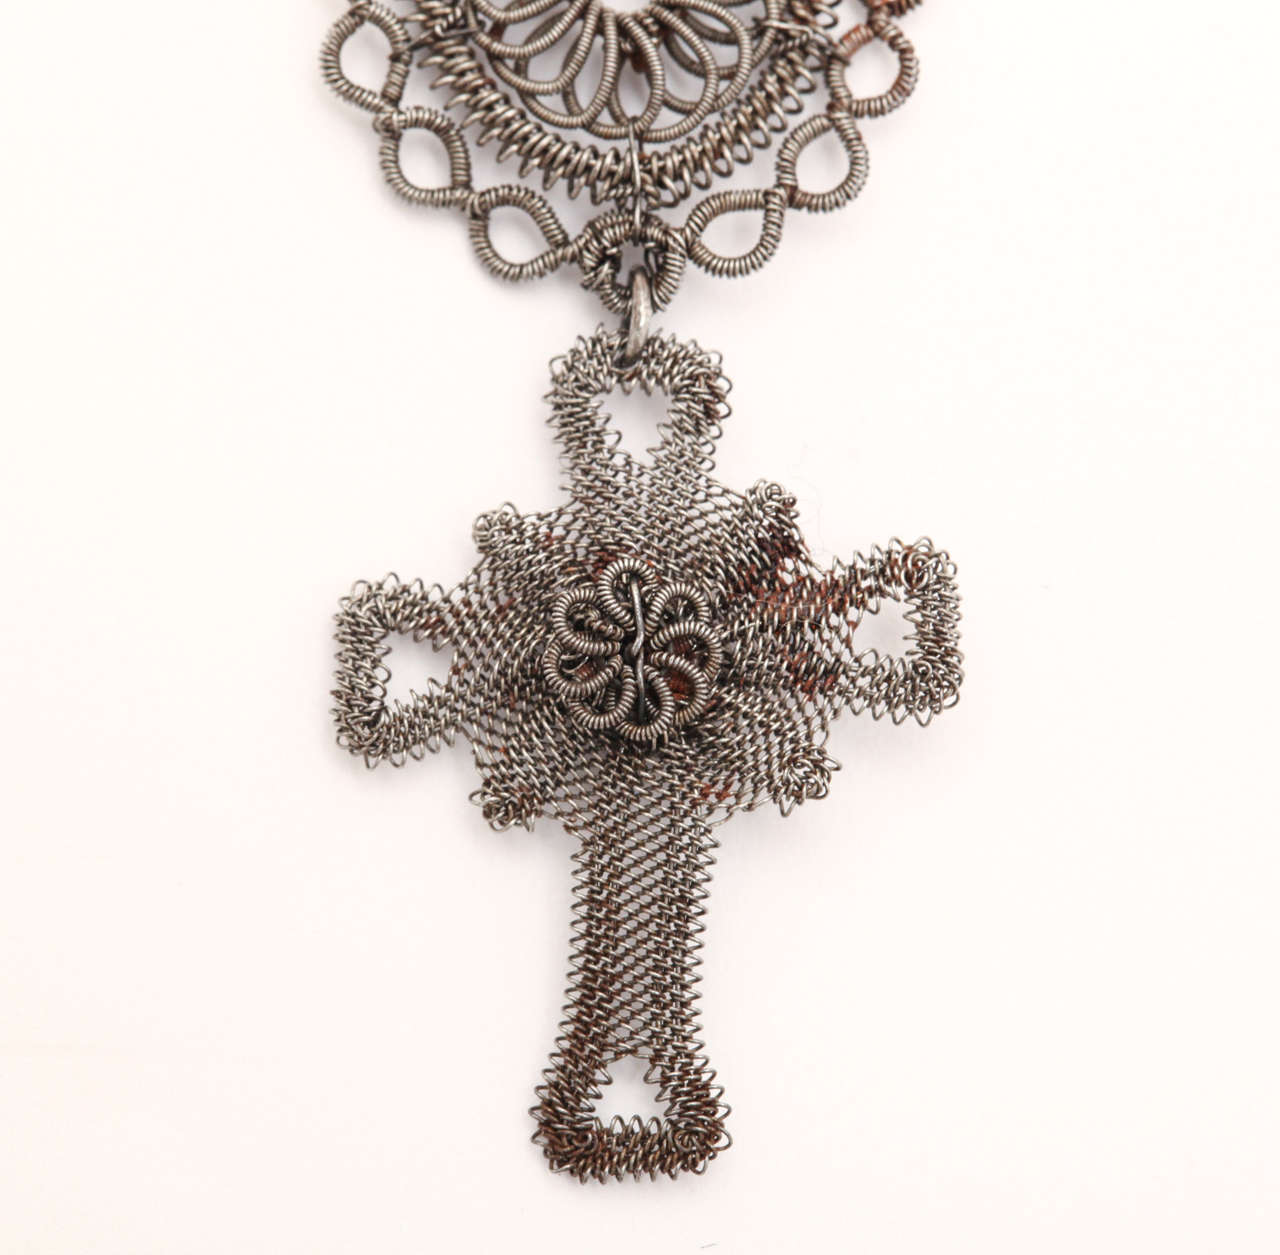 Antique GeorgianSilesian Wirework Cross c .1800 In Good Condition For Sale In Stamford, CT